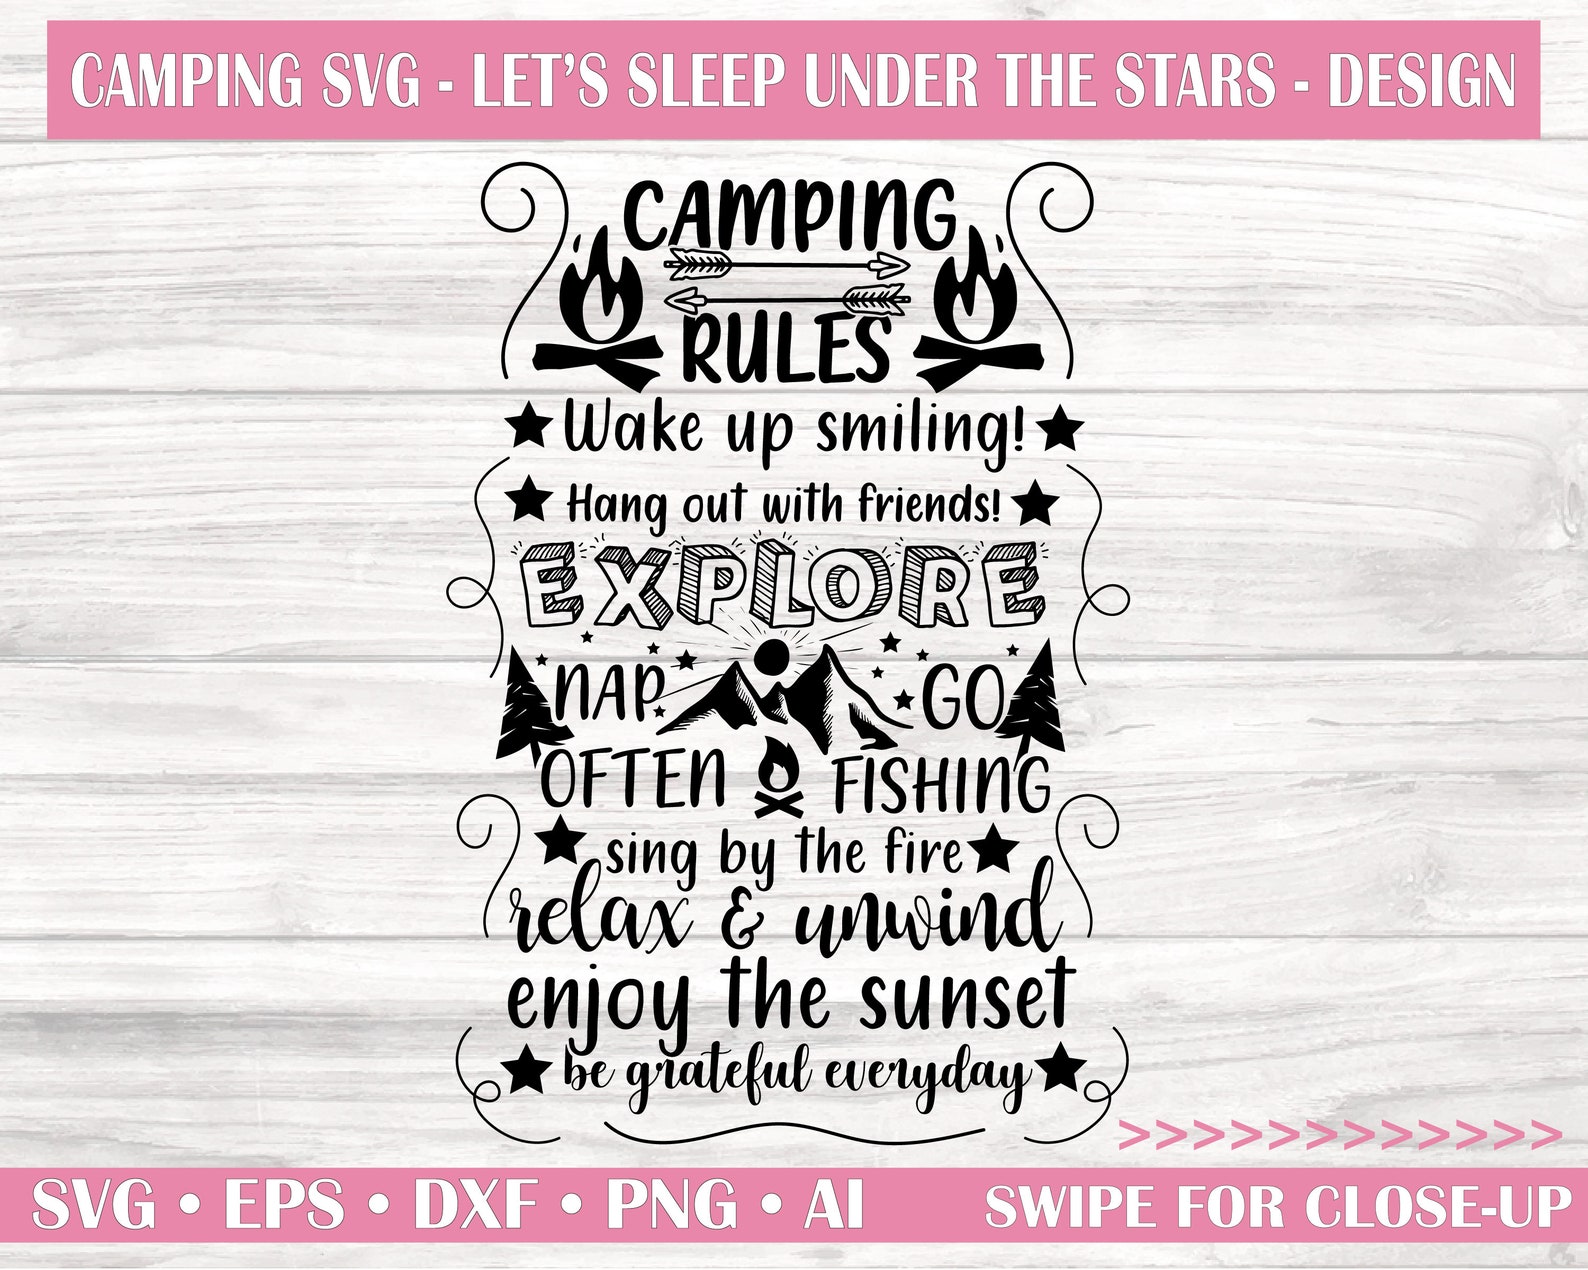 Camp rules. Campsite Rules. Rules svg.